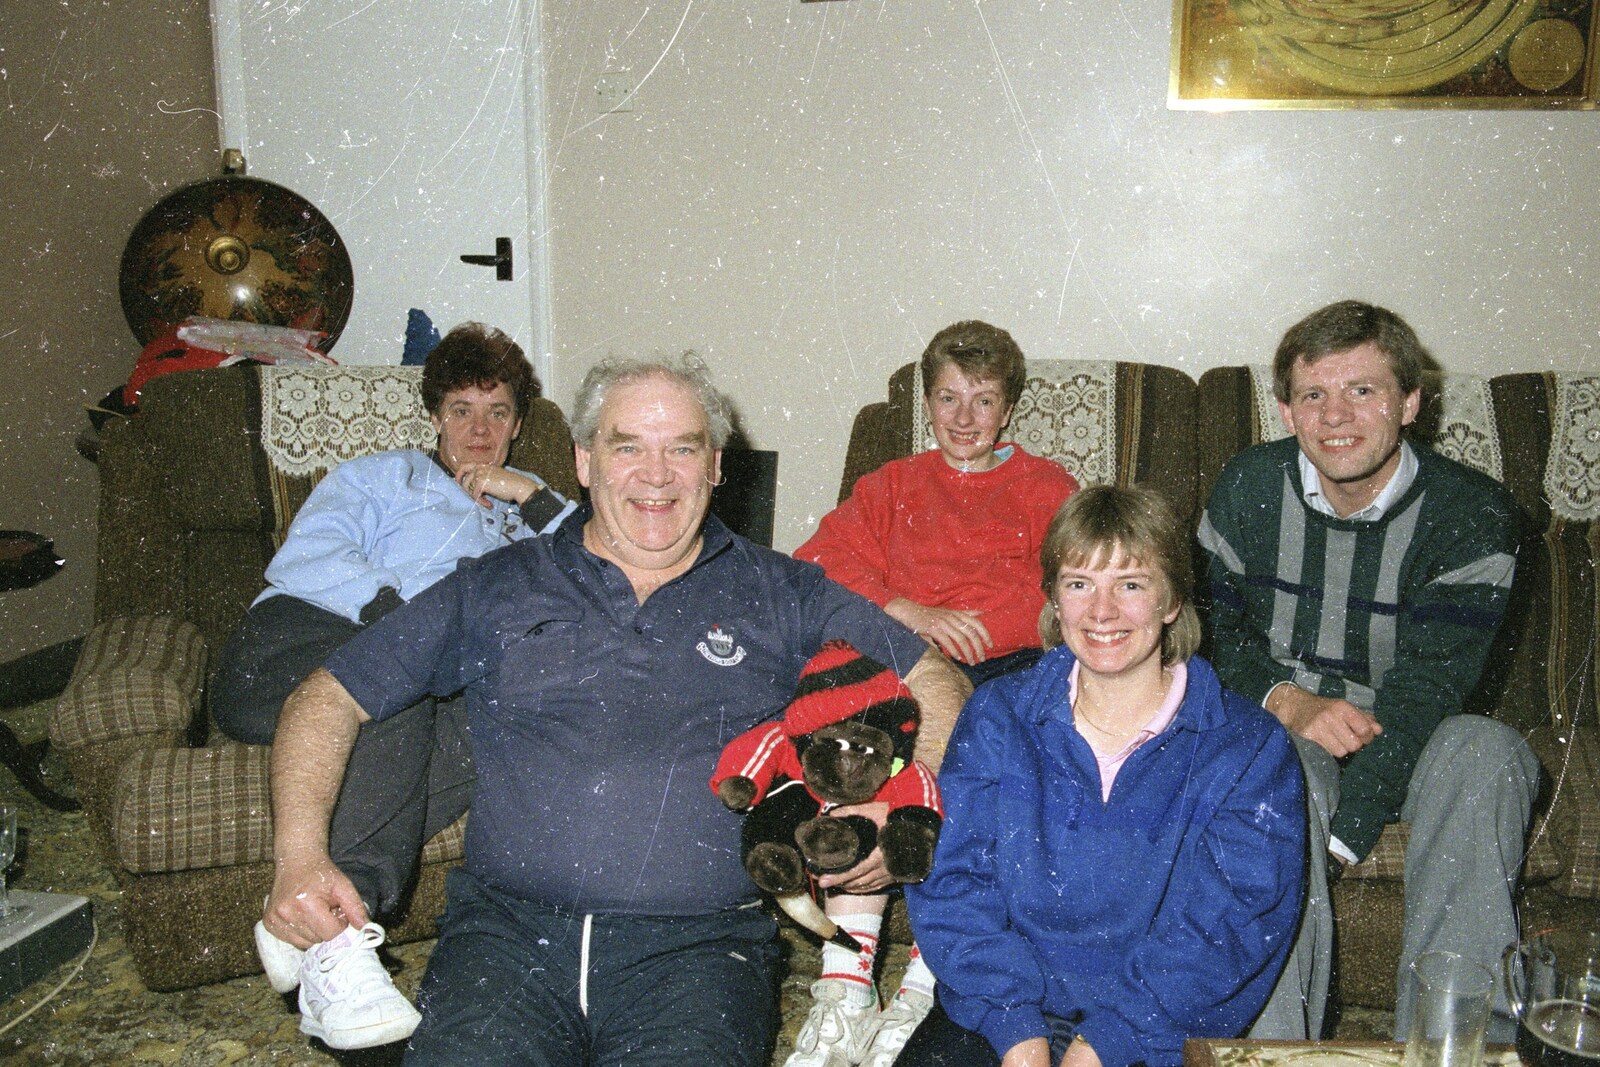 Kenny and the badminton gang from An "Above The Laundrette" Barbeque, Diss, Norfolk - 28th May 1990